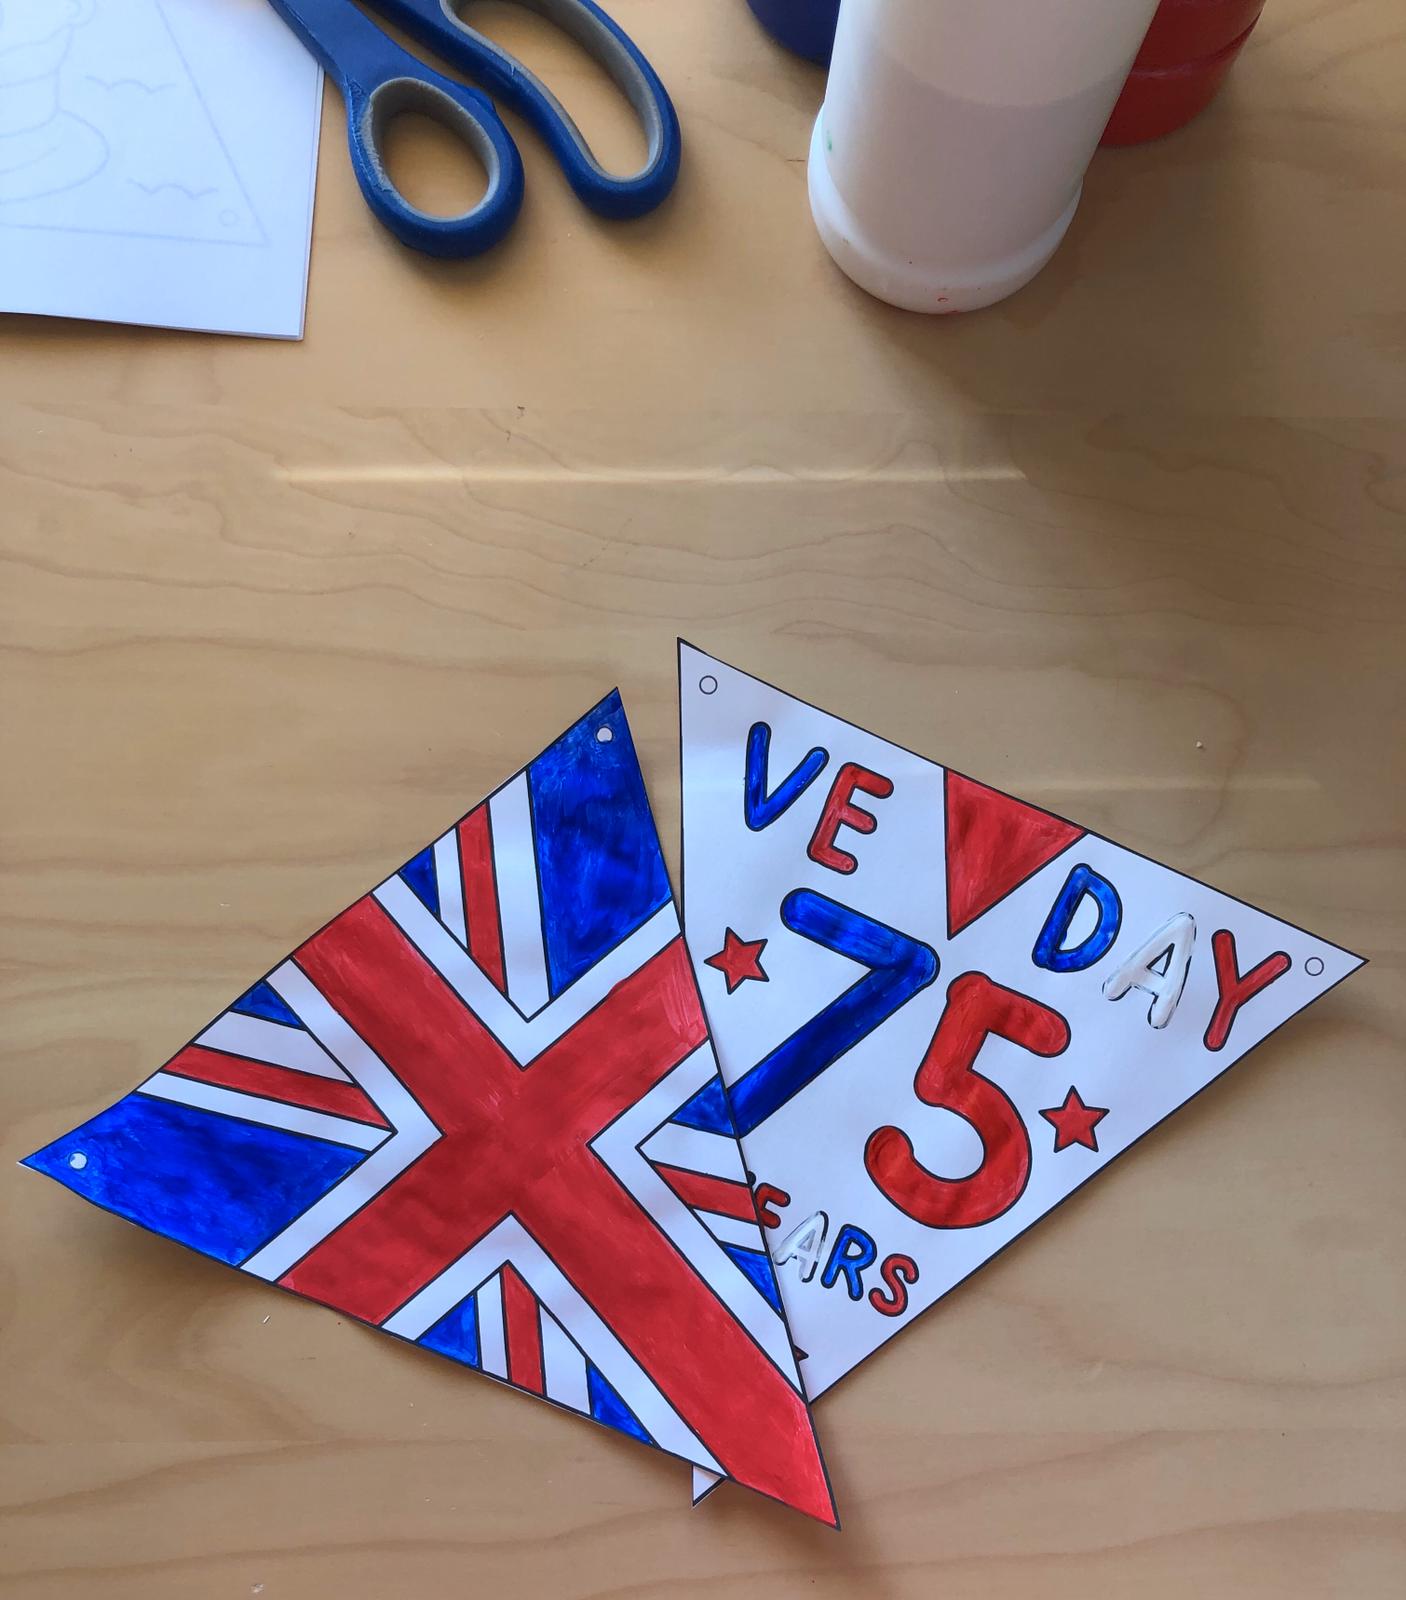 ve-day-bunting-arts-and-crafts-for-8th-may-2020-preloved-uk